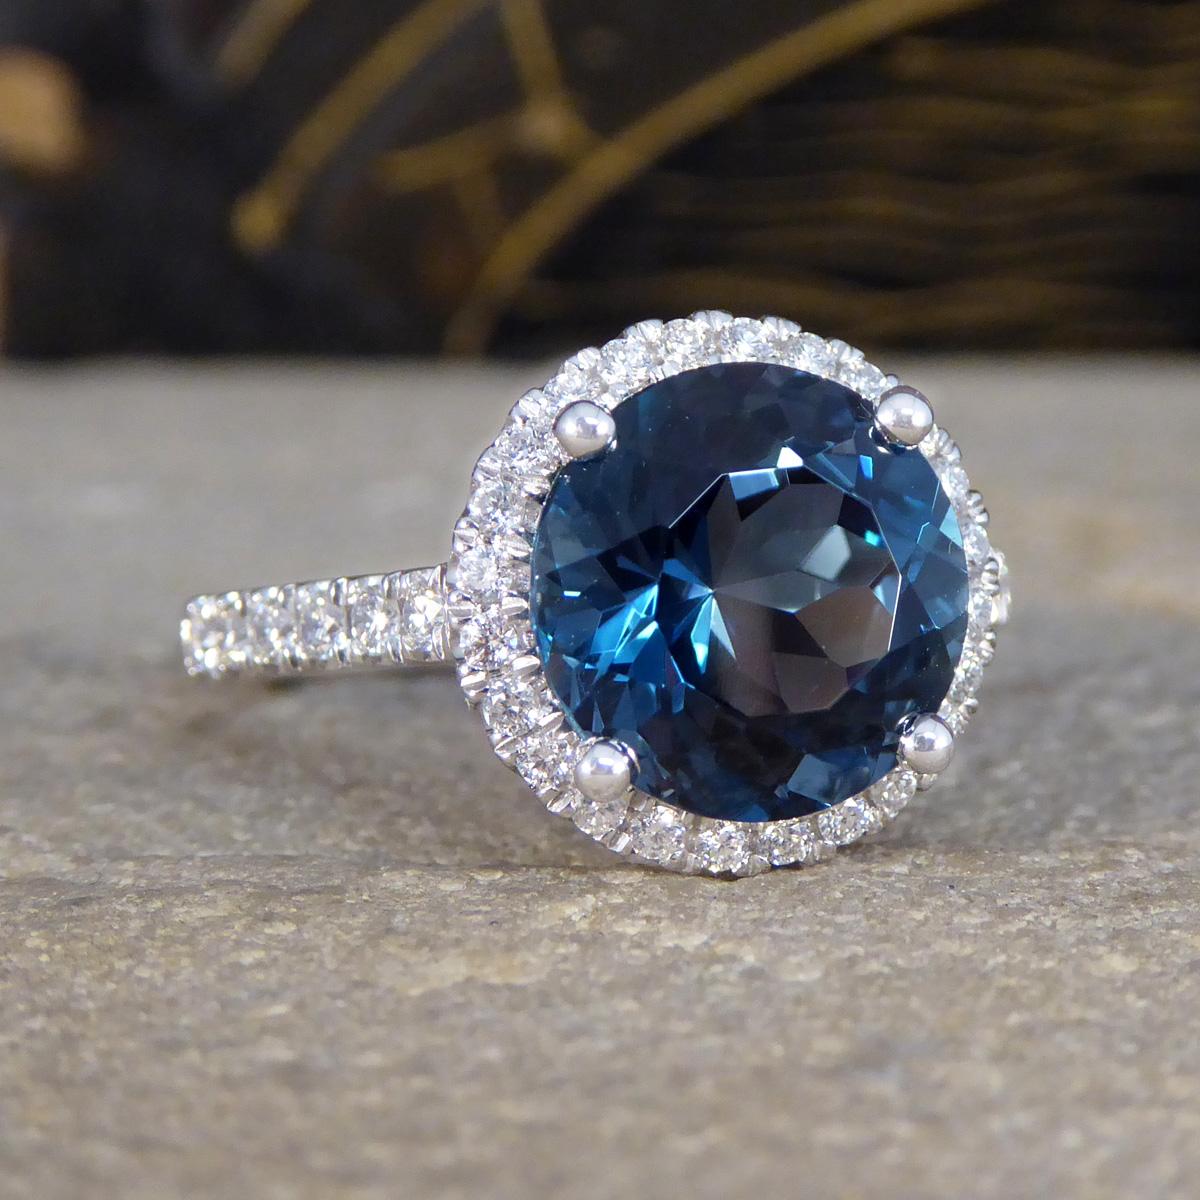 Introducing the captivating and mesmerising colour of the London Blue Topaz in a beautiful cluster ring design. This exquisite ring features a stunning 4.59ct London Blue Topaz at its heart, renowned for its deep and enchanting blue hue that echoes